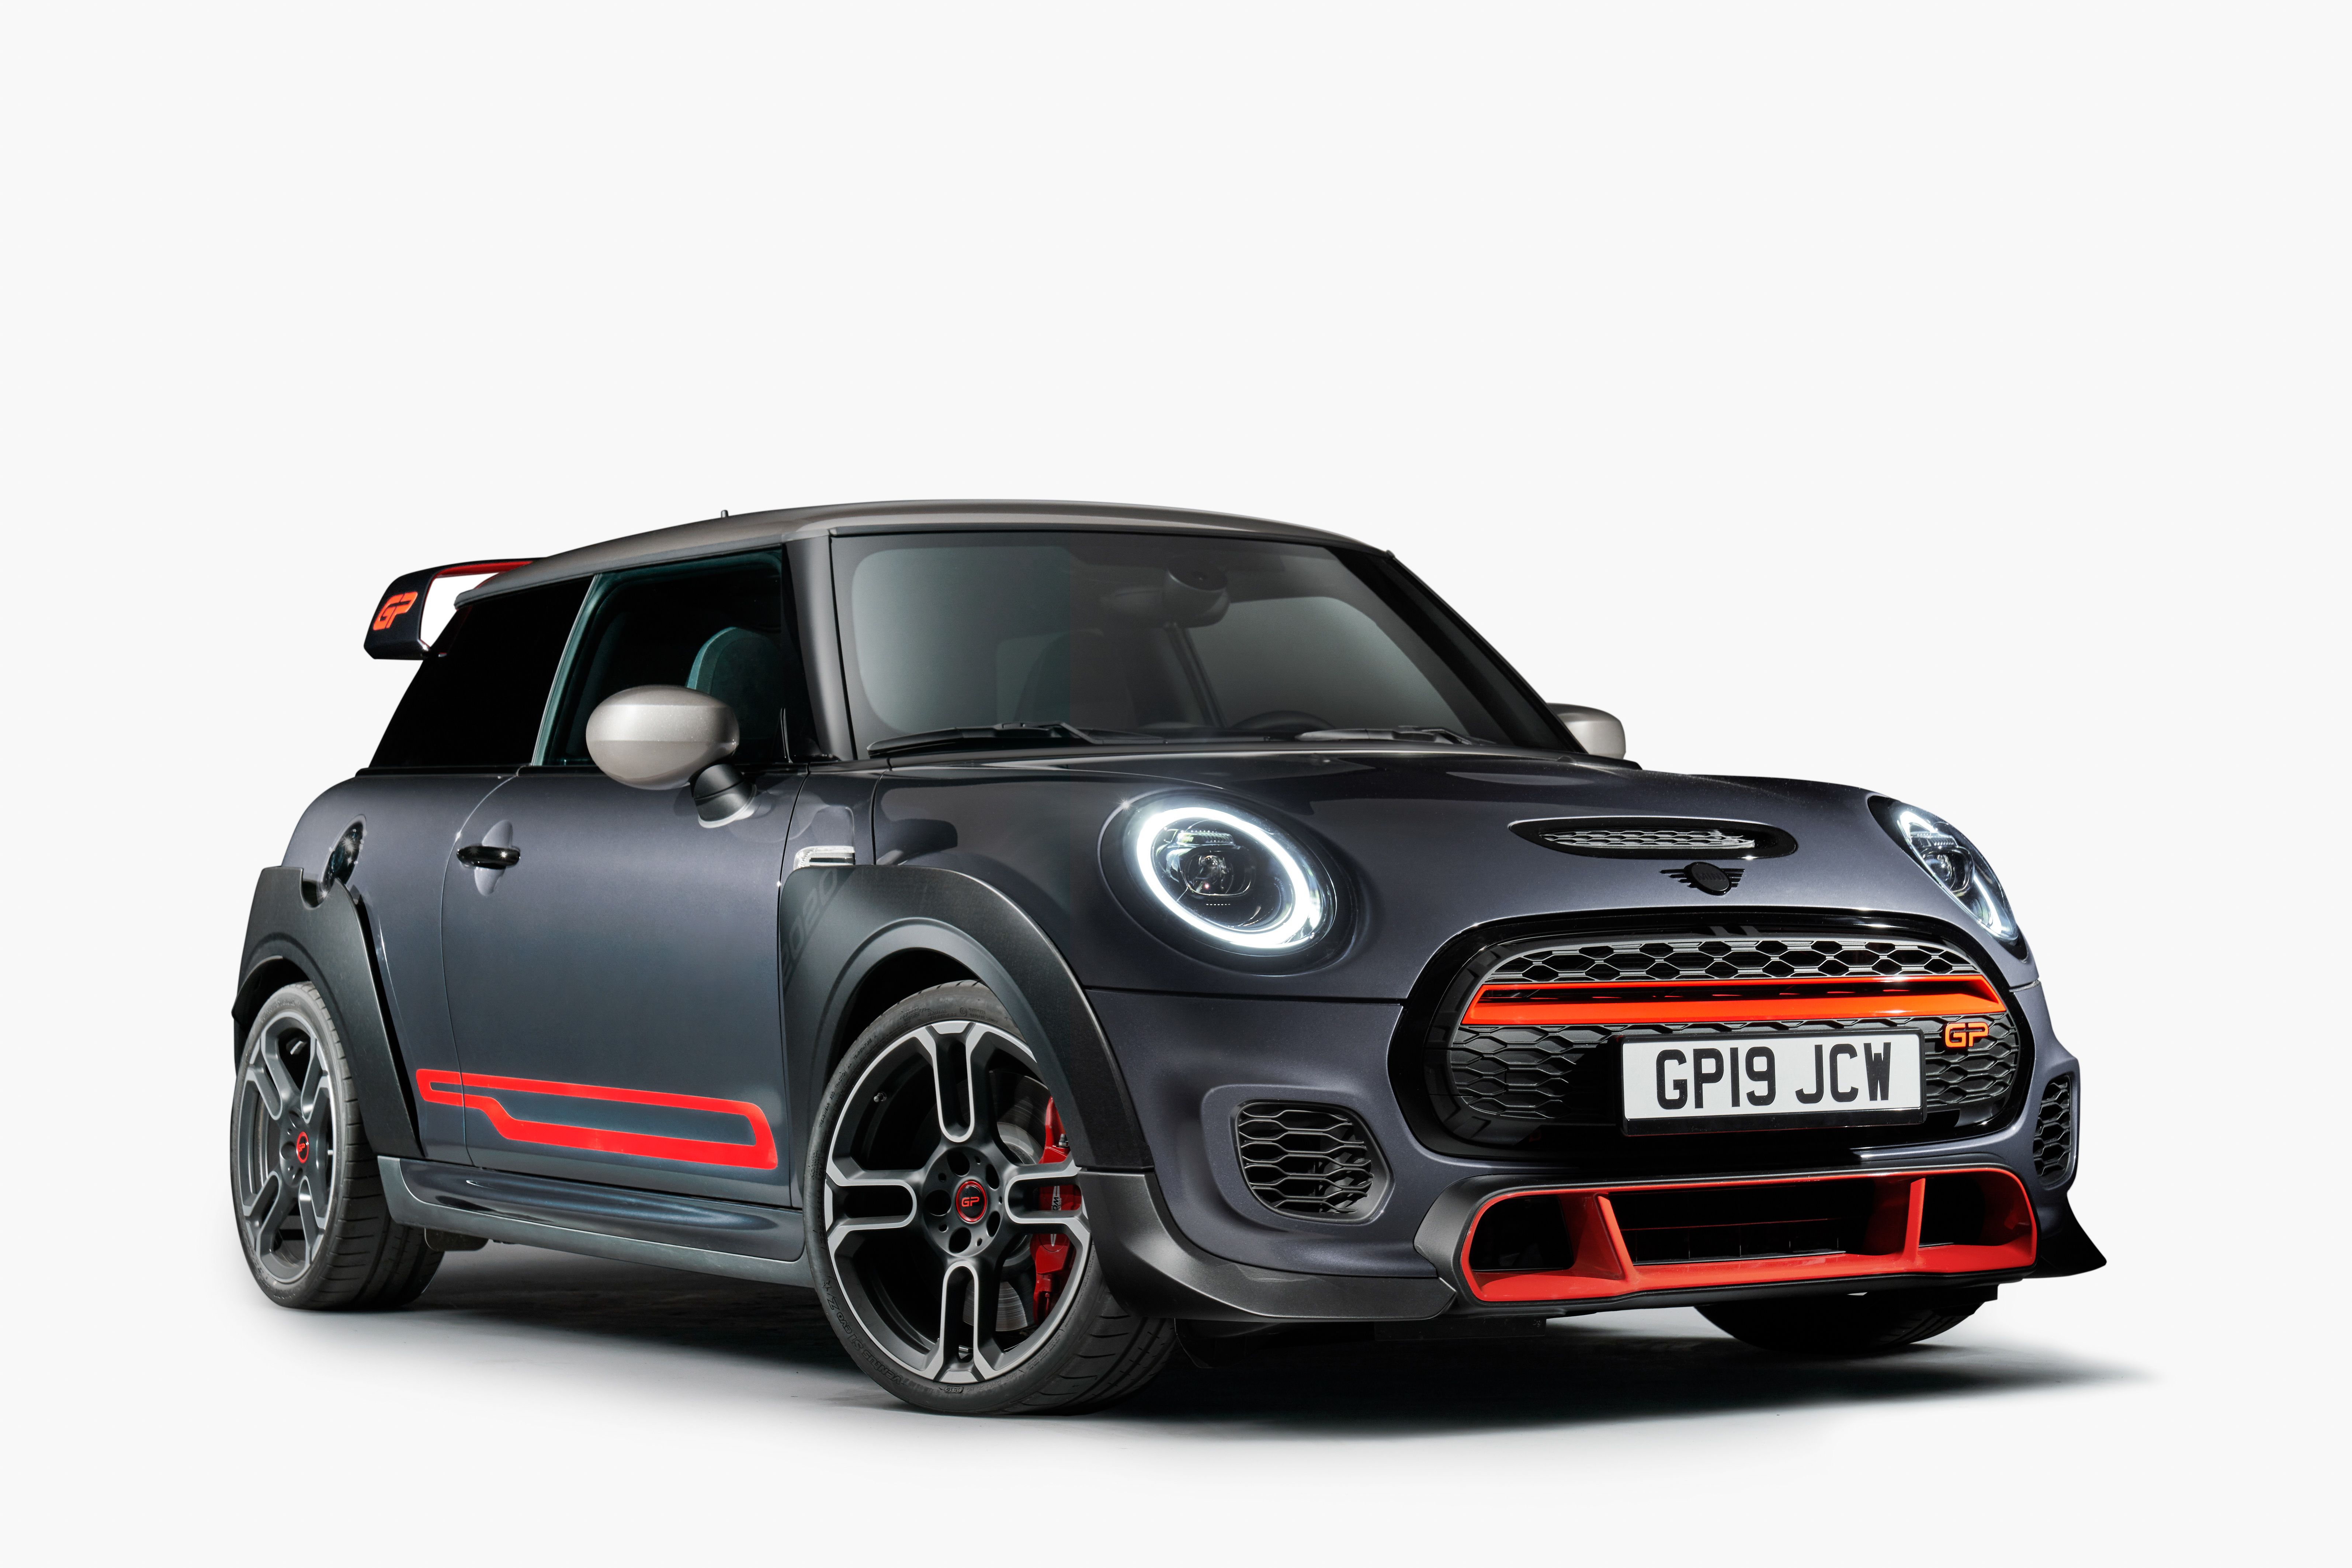 302-HP Mini John Cooper Works GP Is Powerful and Production-Ready with ...